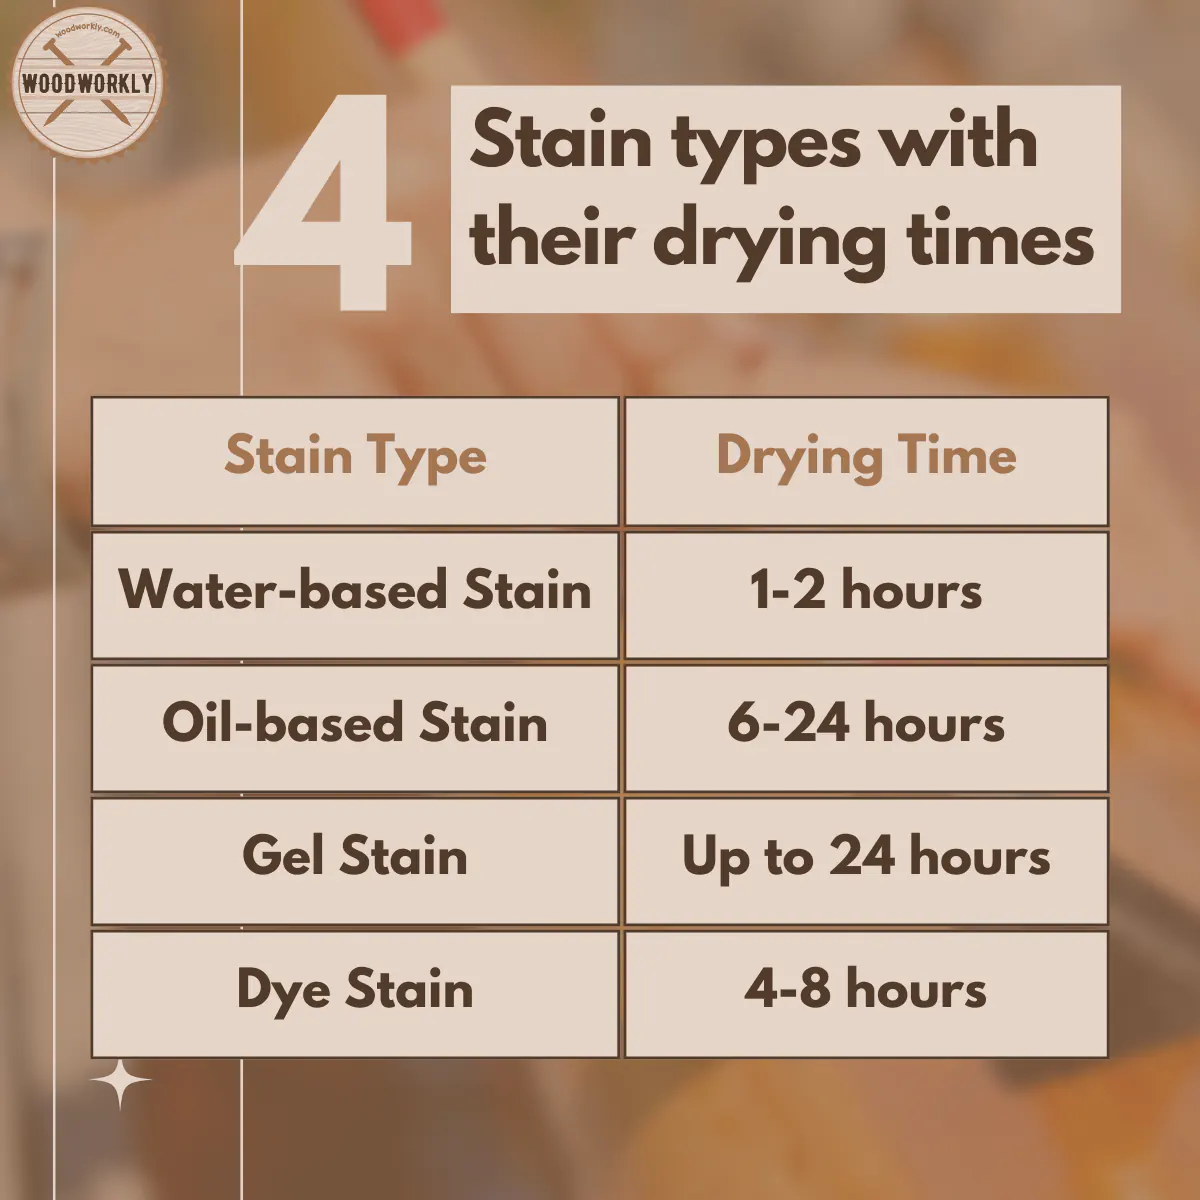 Stain type with their drying times